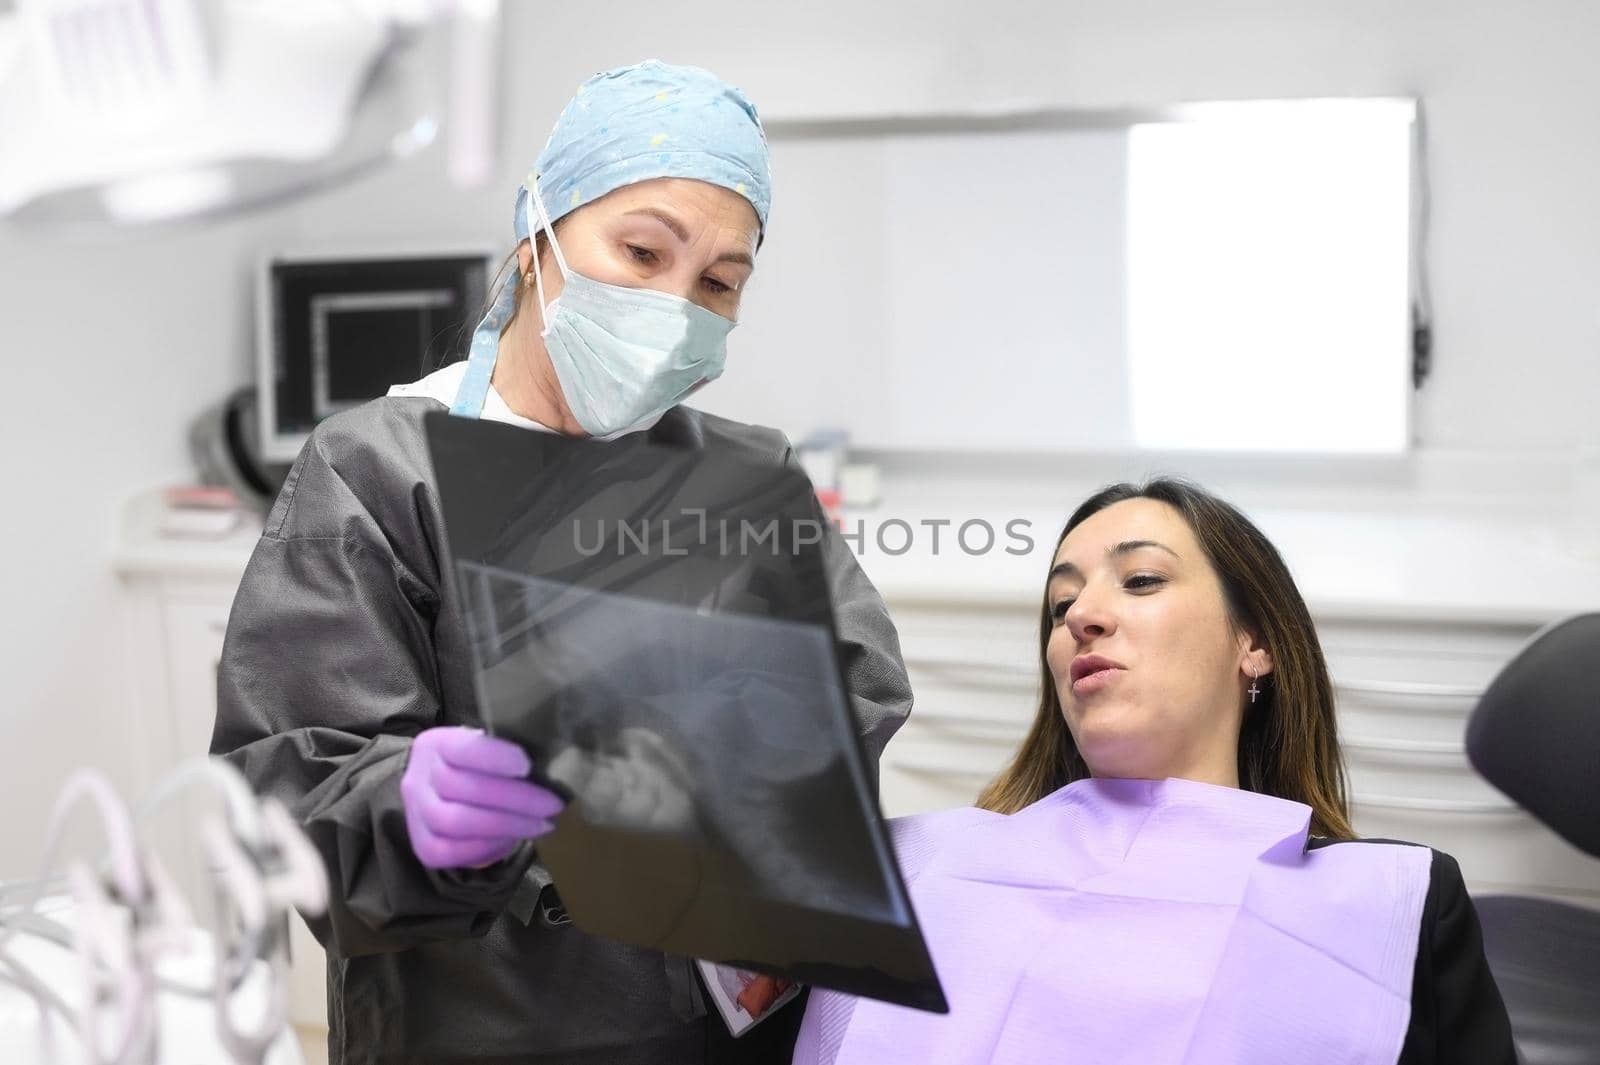 Female dentist pointing at patient's X-ray image in dental office. High quality photo